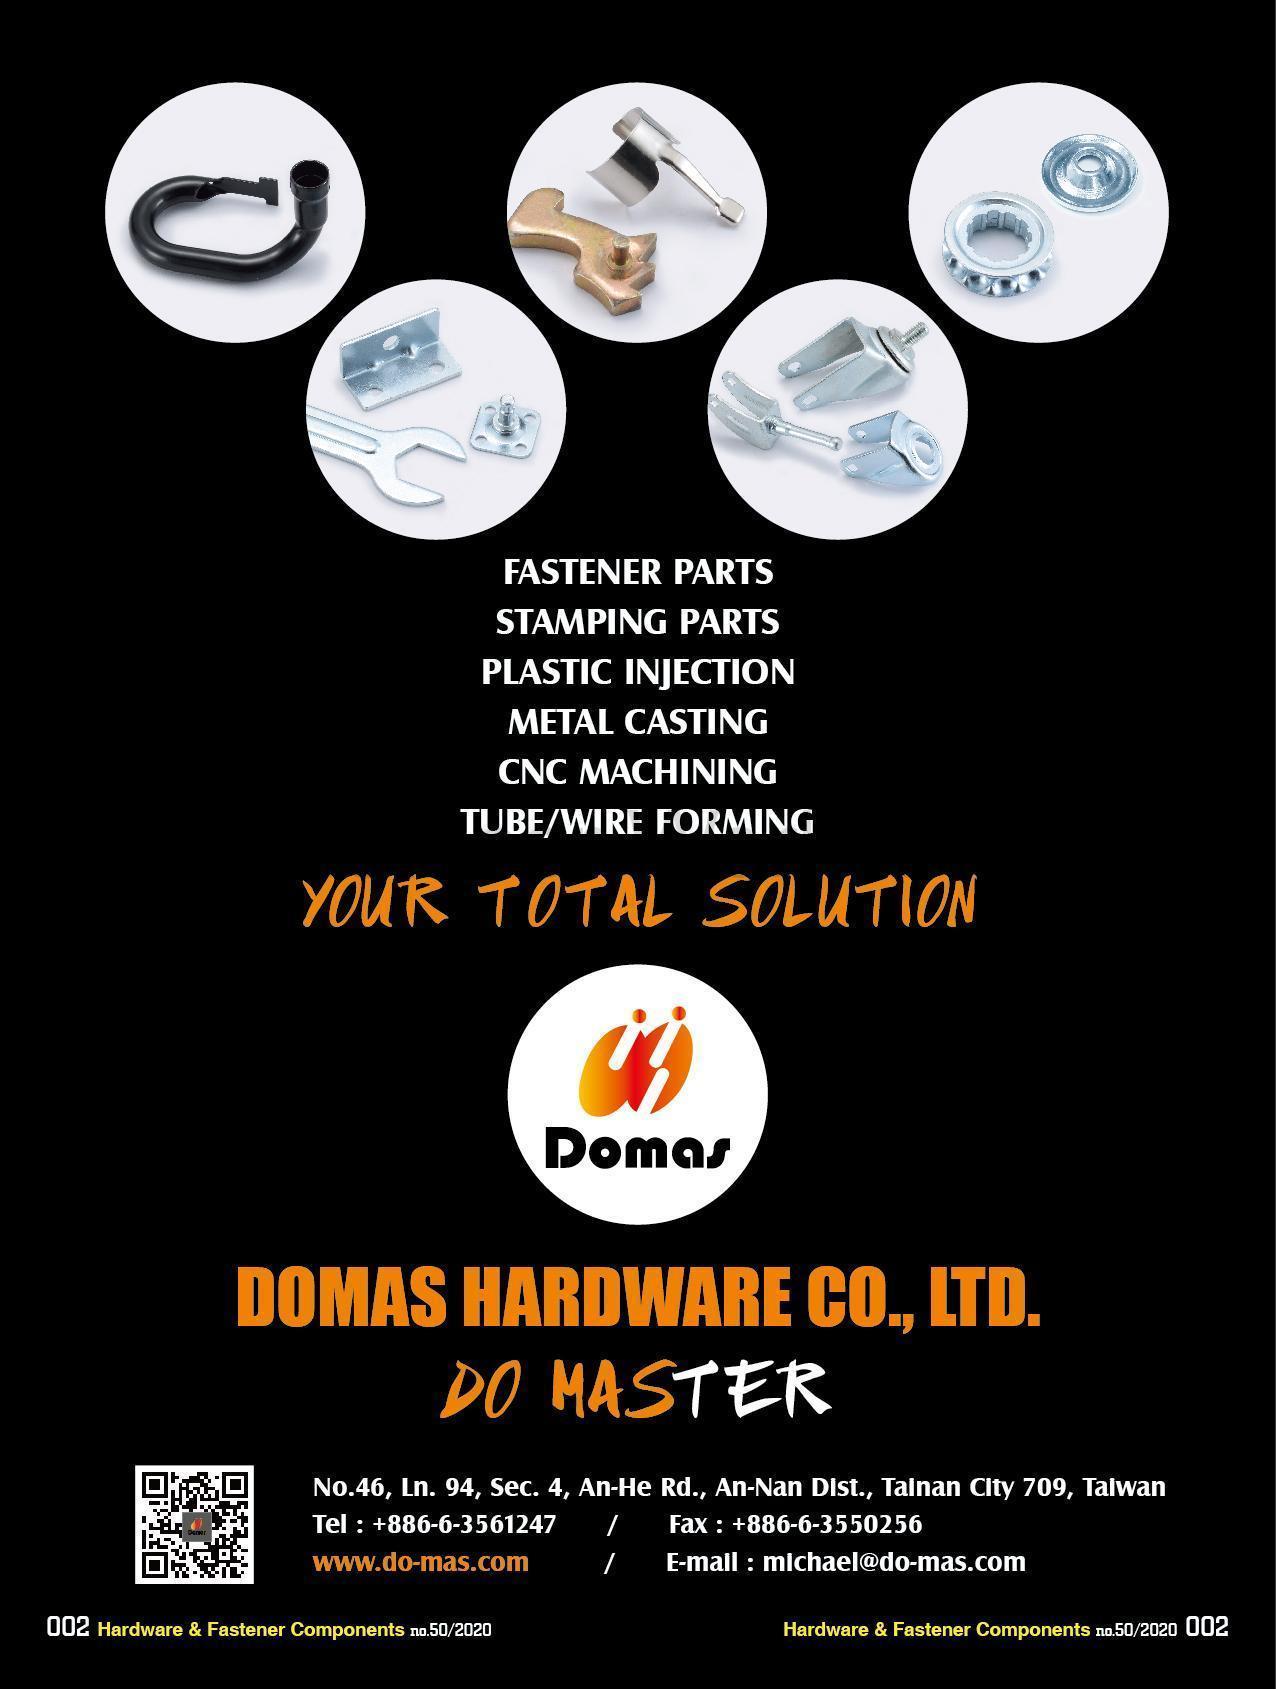 DOMAS HARDWARE CO., LTD. , Fastener Parts, Stamping Parts, Plastic Injection, Metal Casting, CNC Machining, Tube/Wire Forming